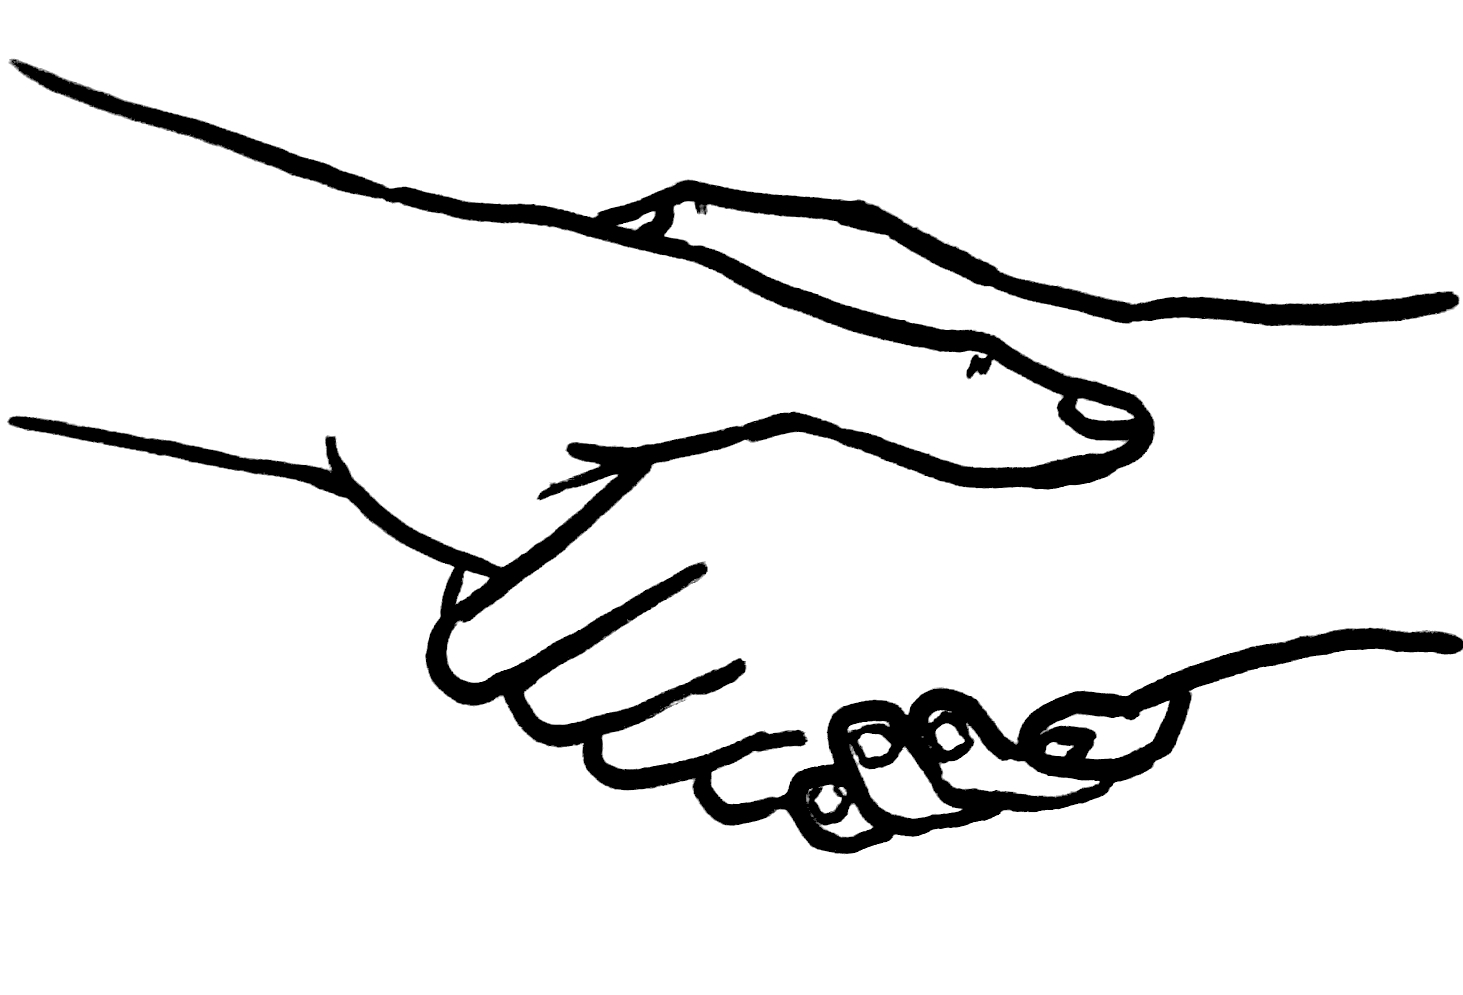 Pix For > Drawing Shaking Hands